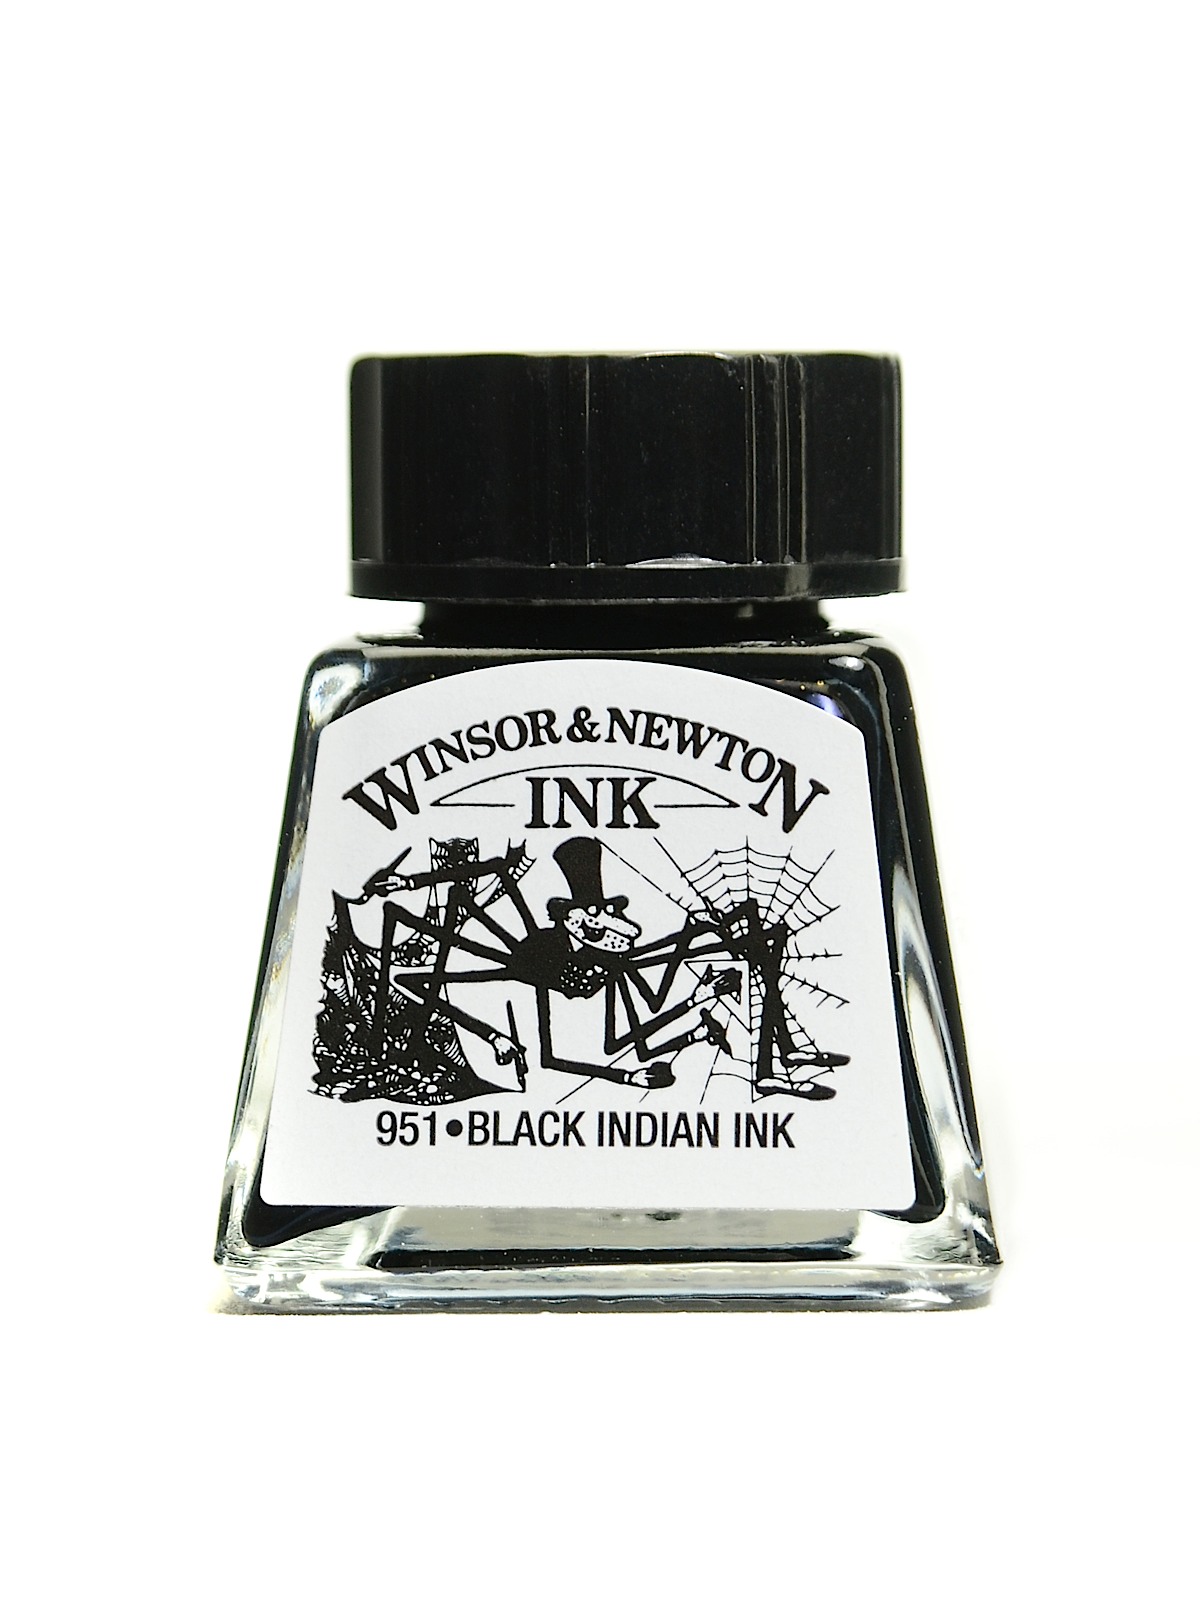 Drawing Inks black indian ink, 14 ml, 30 (pack of 4)